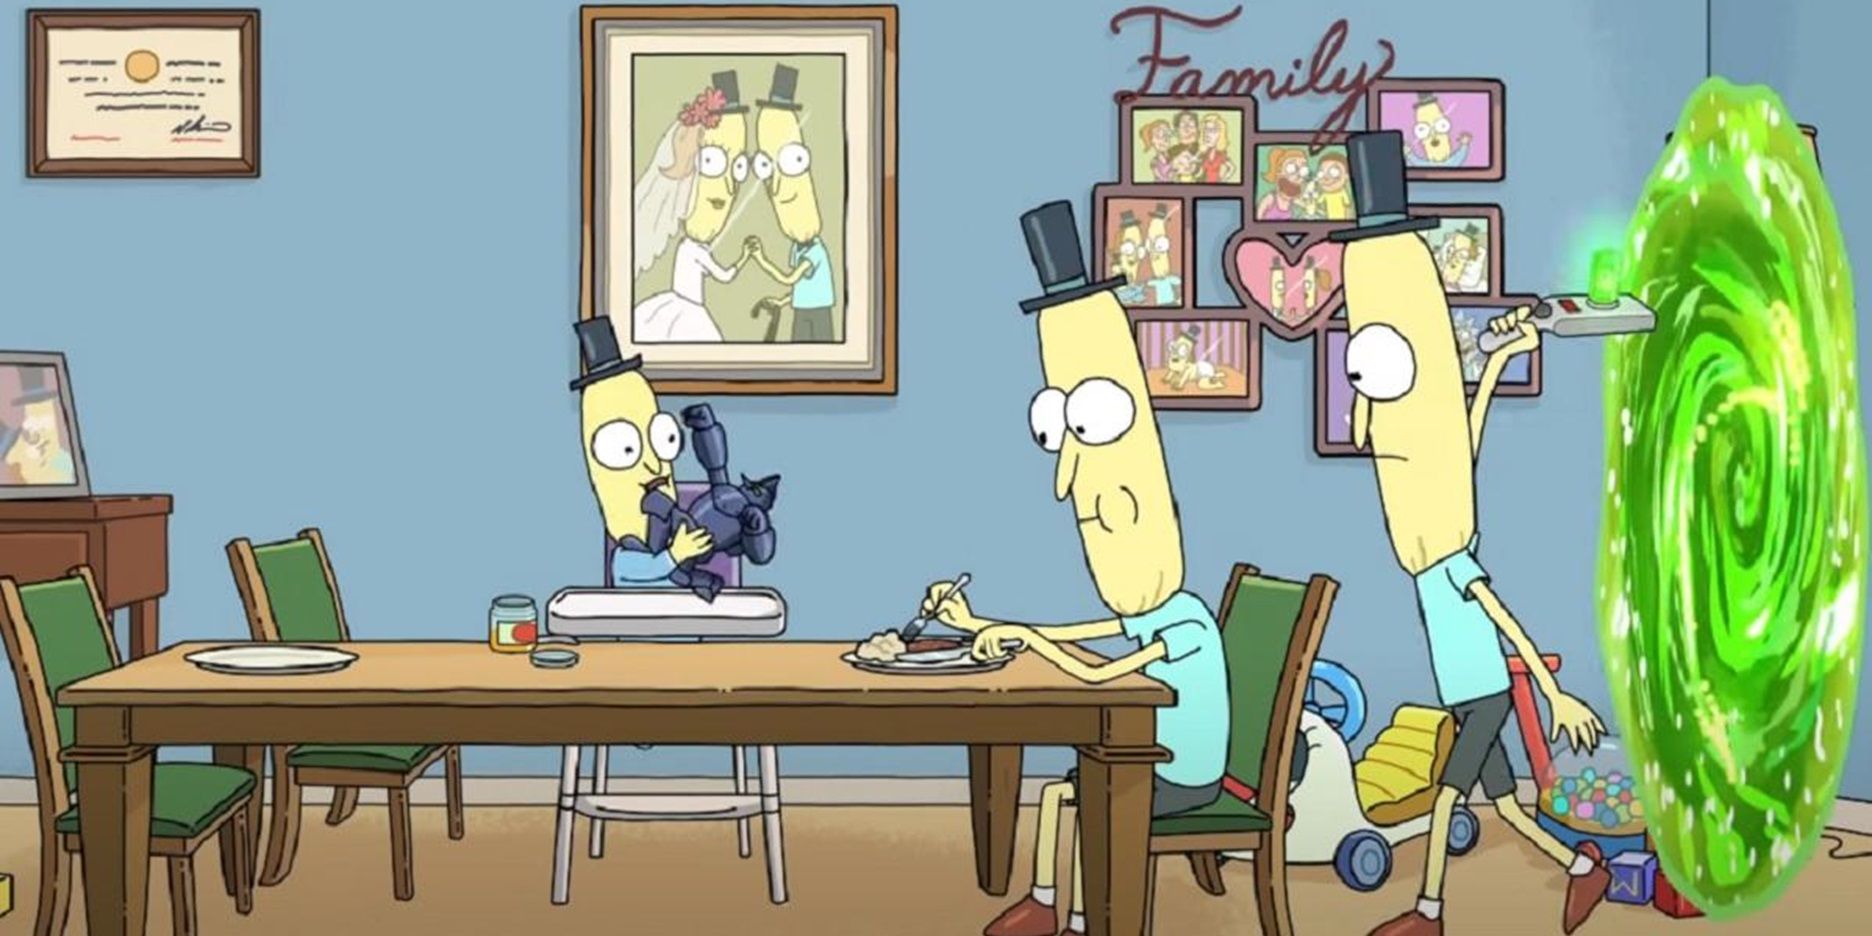 Mr Poopybutthole steps through a portal in Rick and Morty